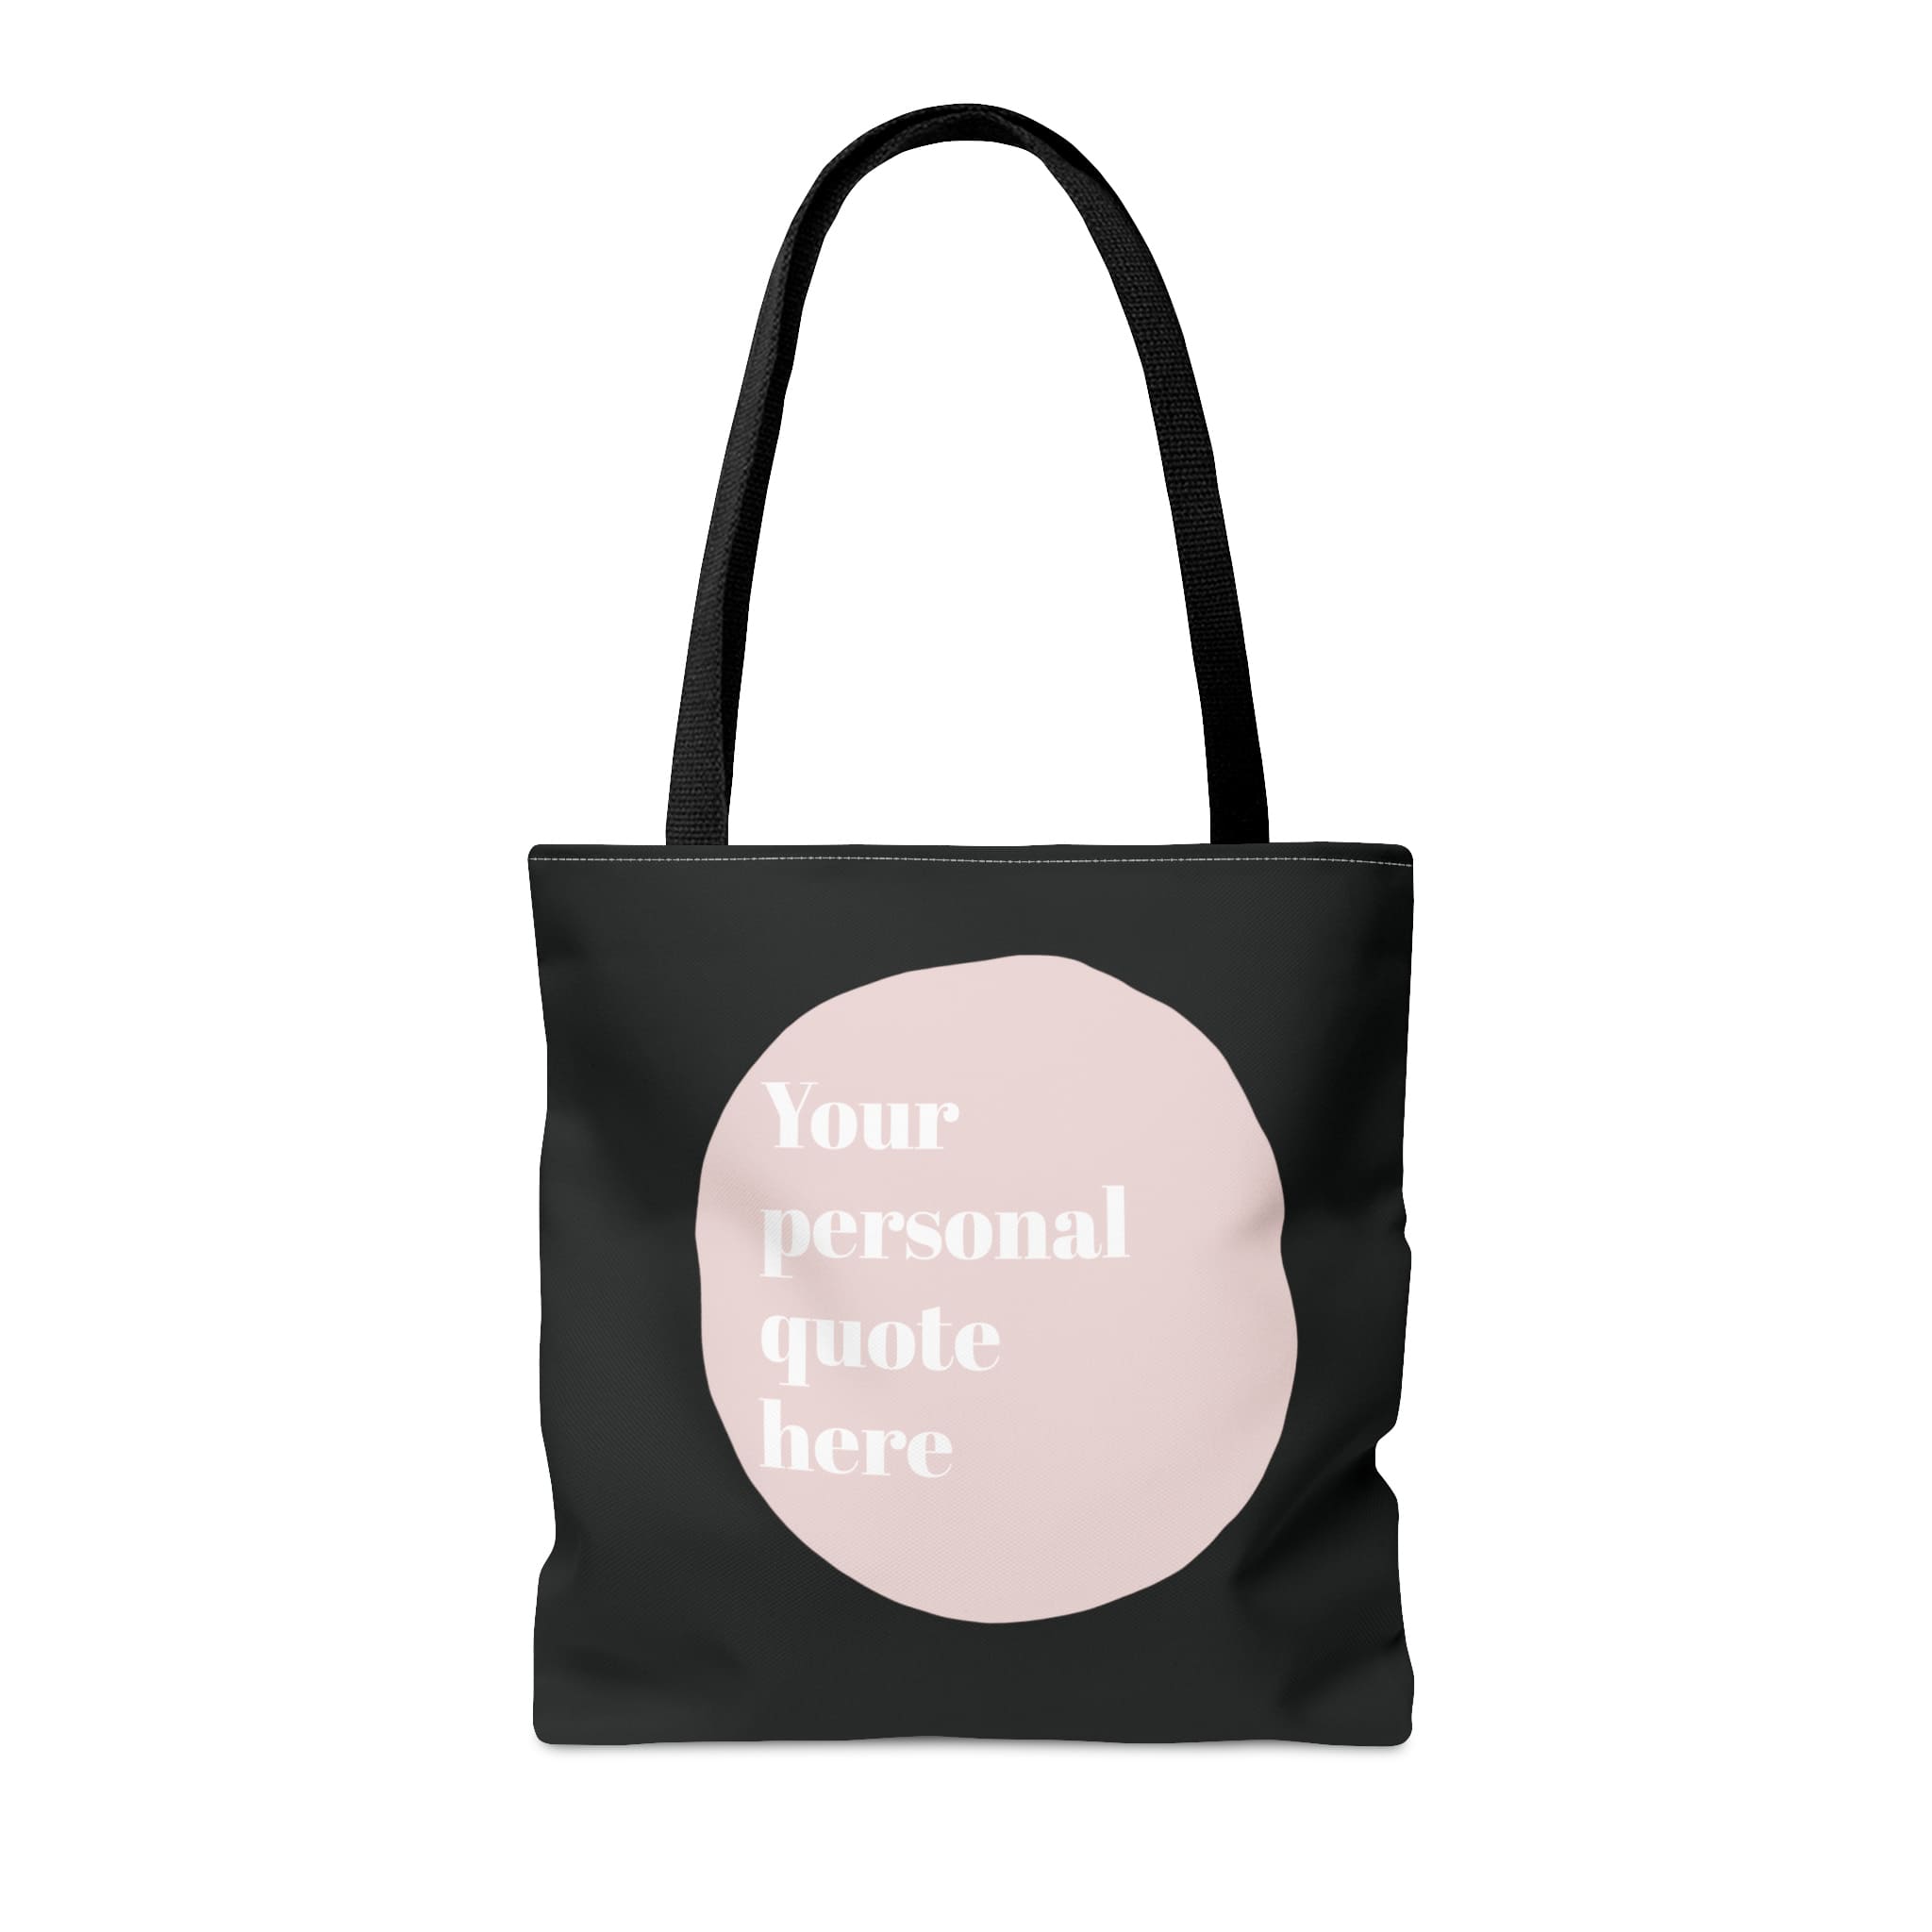 fashionable custom tote bags in color blocking black and light pink shapes and personal quote on the back side